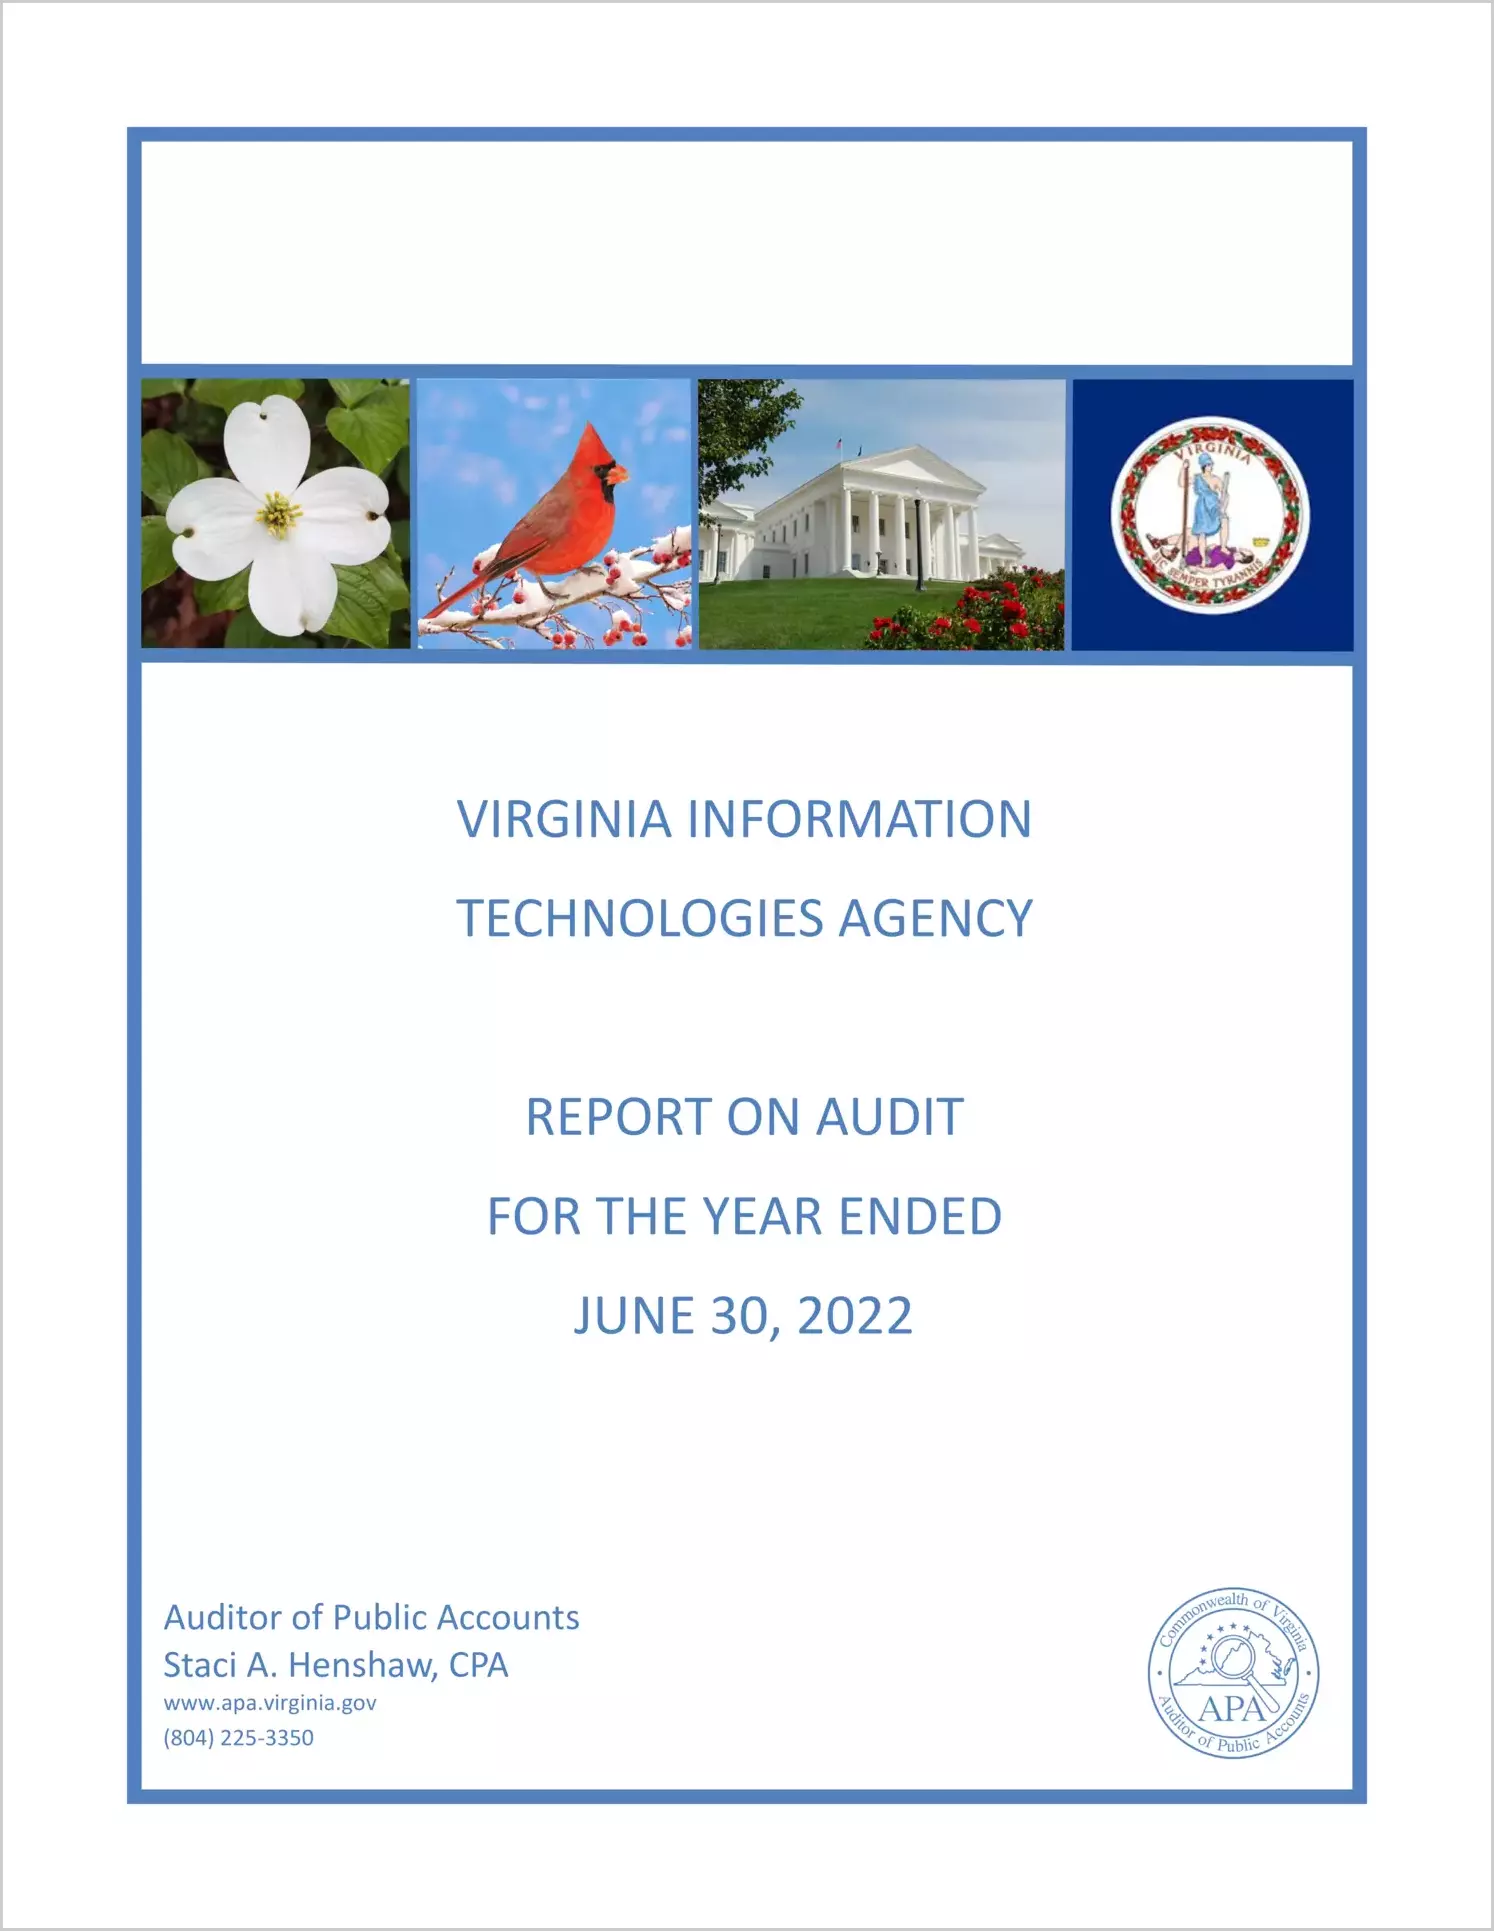 Virginia Information Technologies Agency for the period June 30, 2022